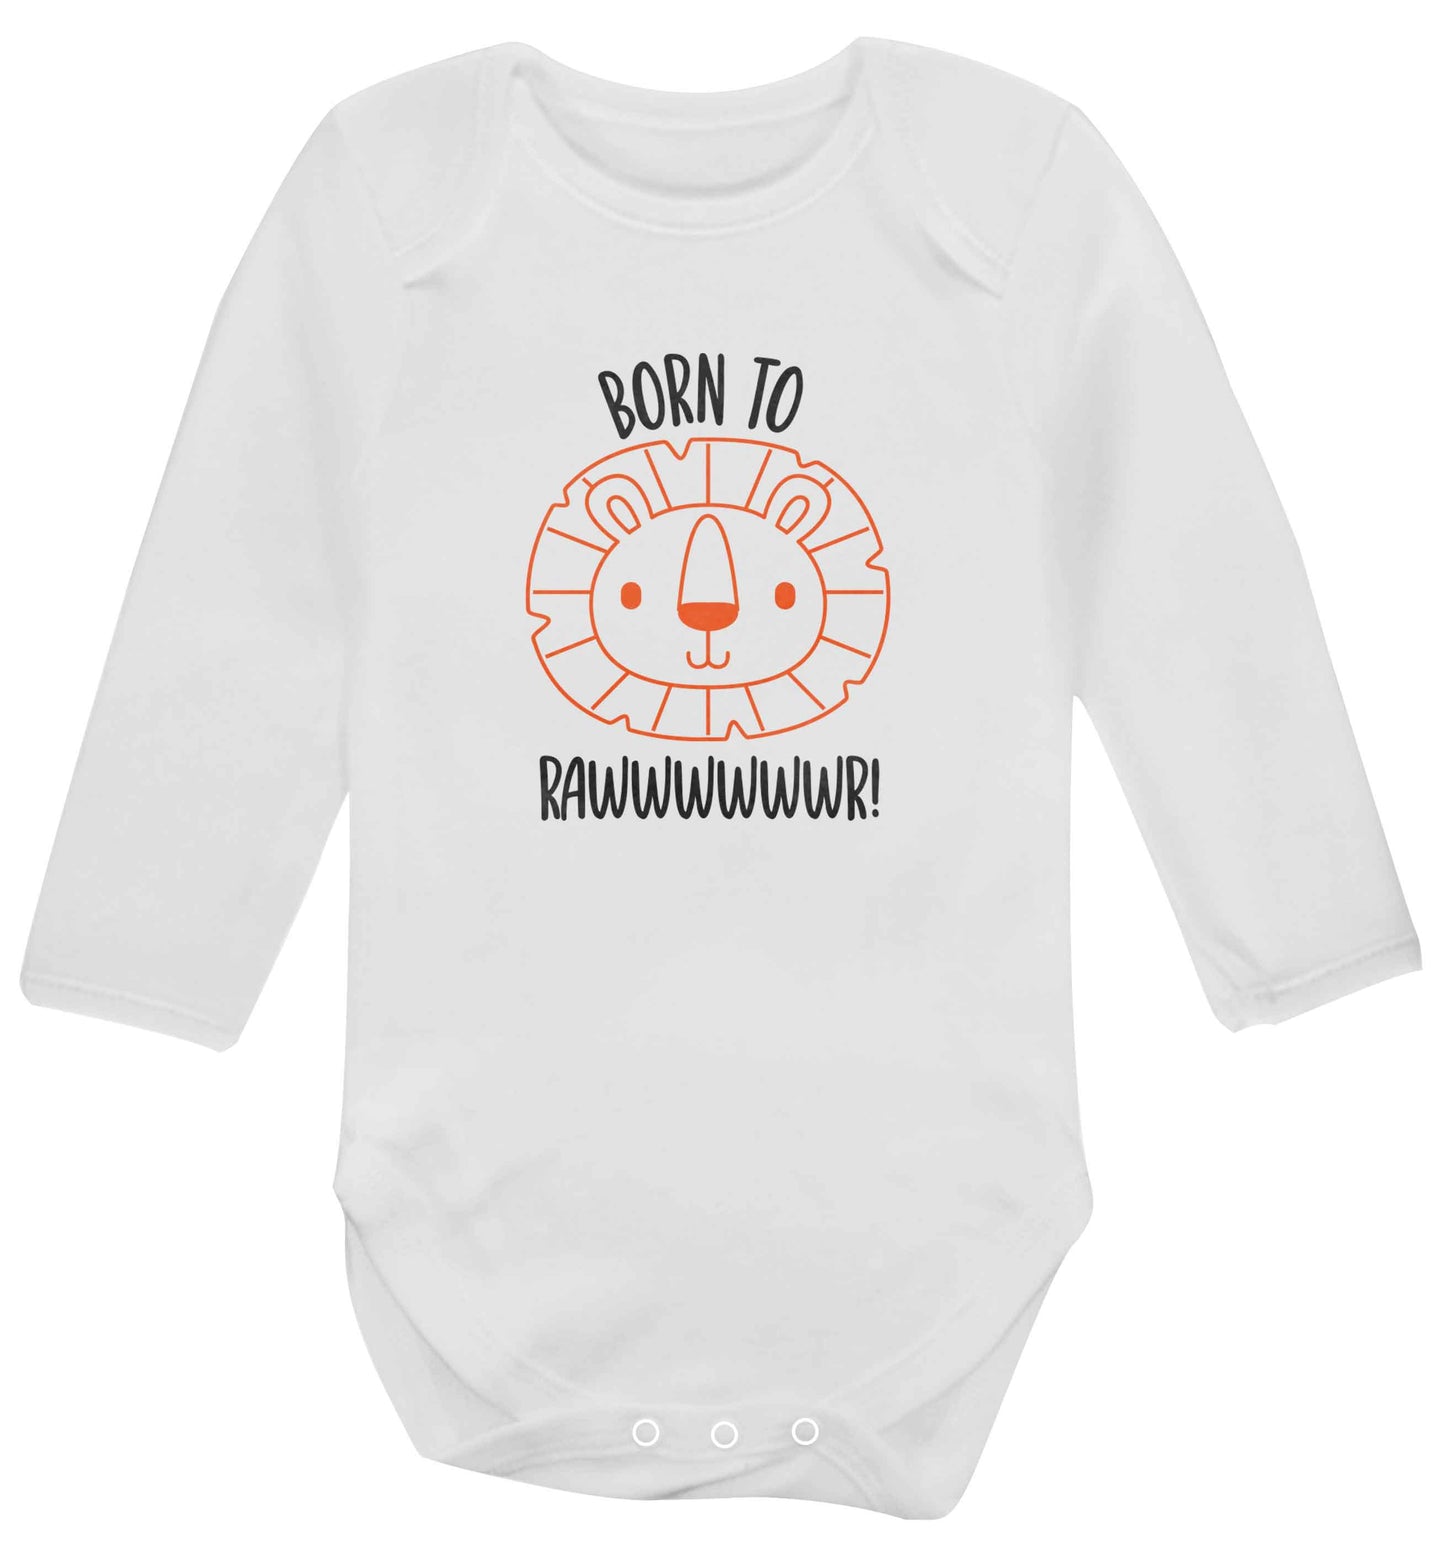 Born to rawr baby vest long sleeved white 6-12 months